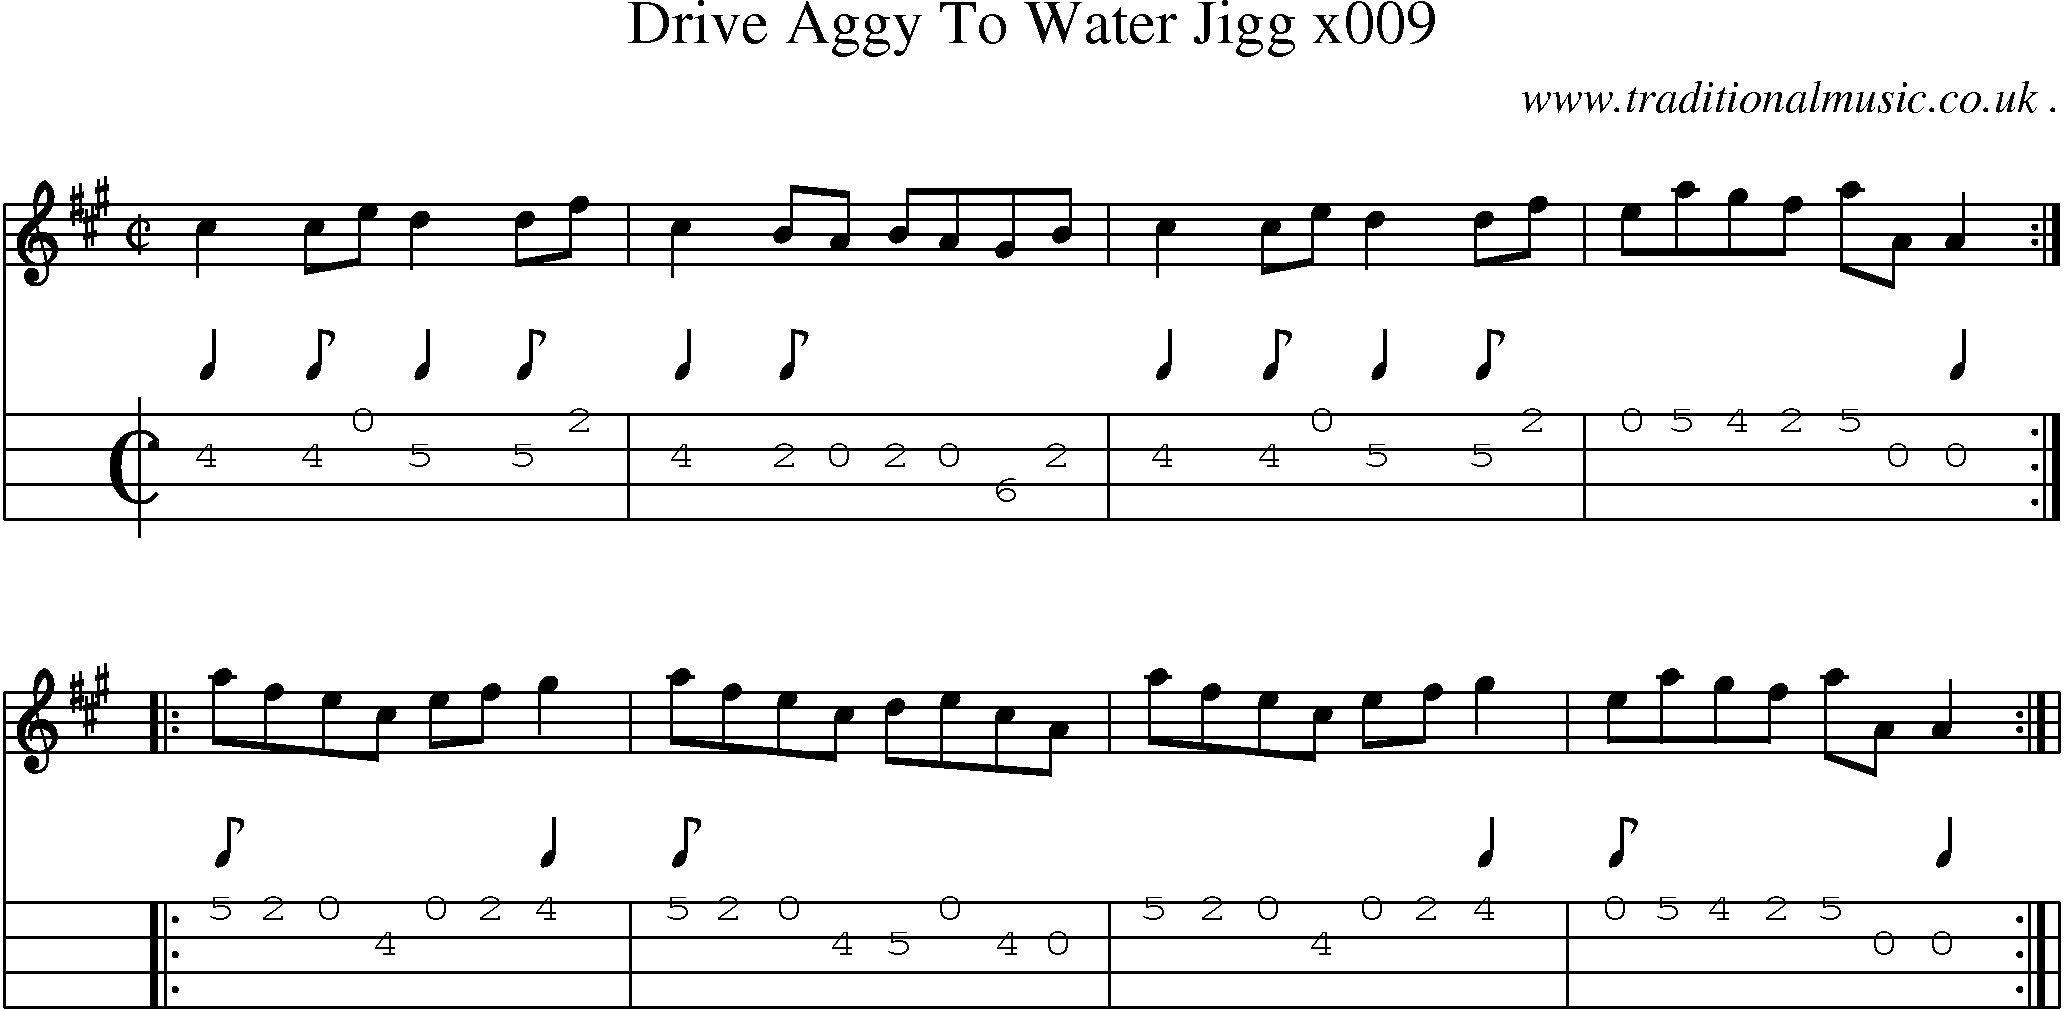 Sheet-Music and Mandolin Tabs for Drive Aggy To Water Jigg X009